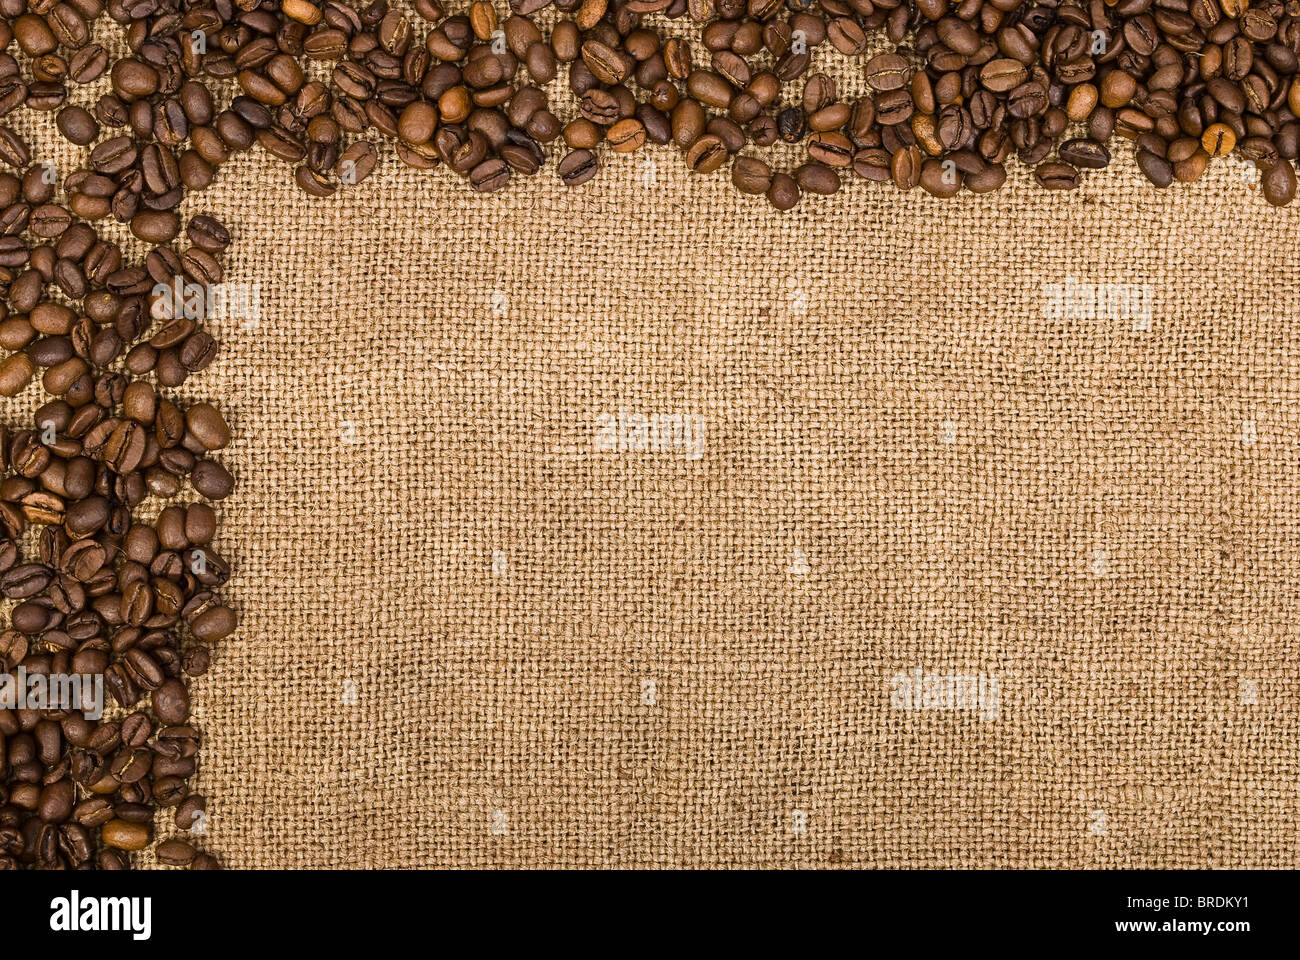 Coffee beans and sackcloth background Stock Photo